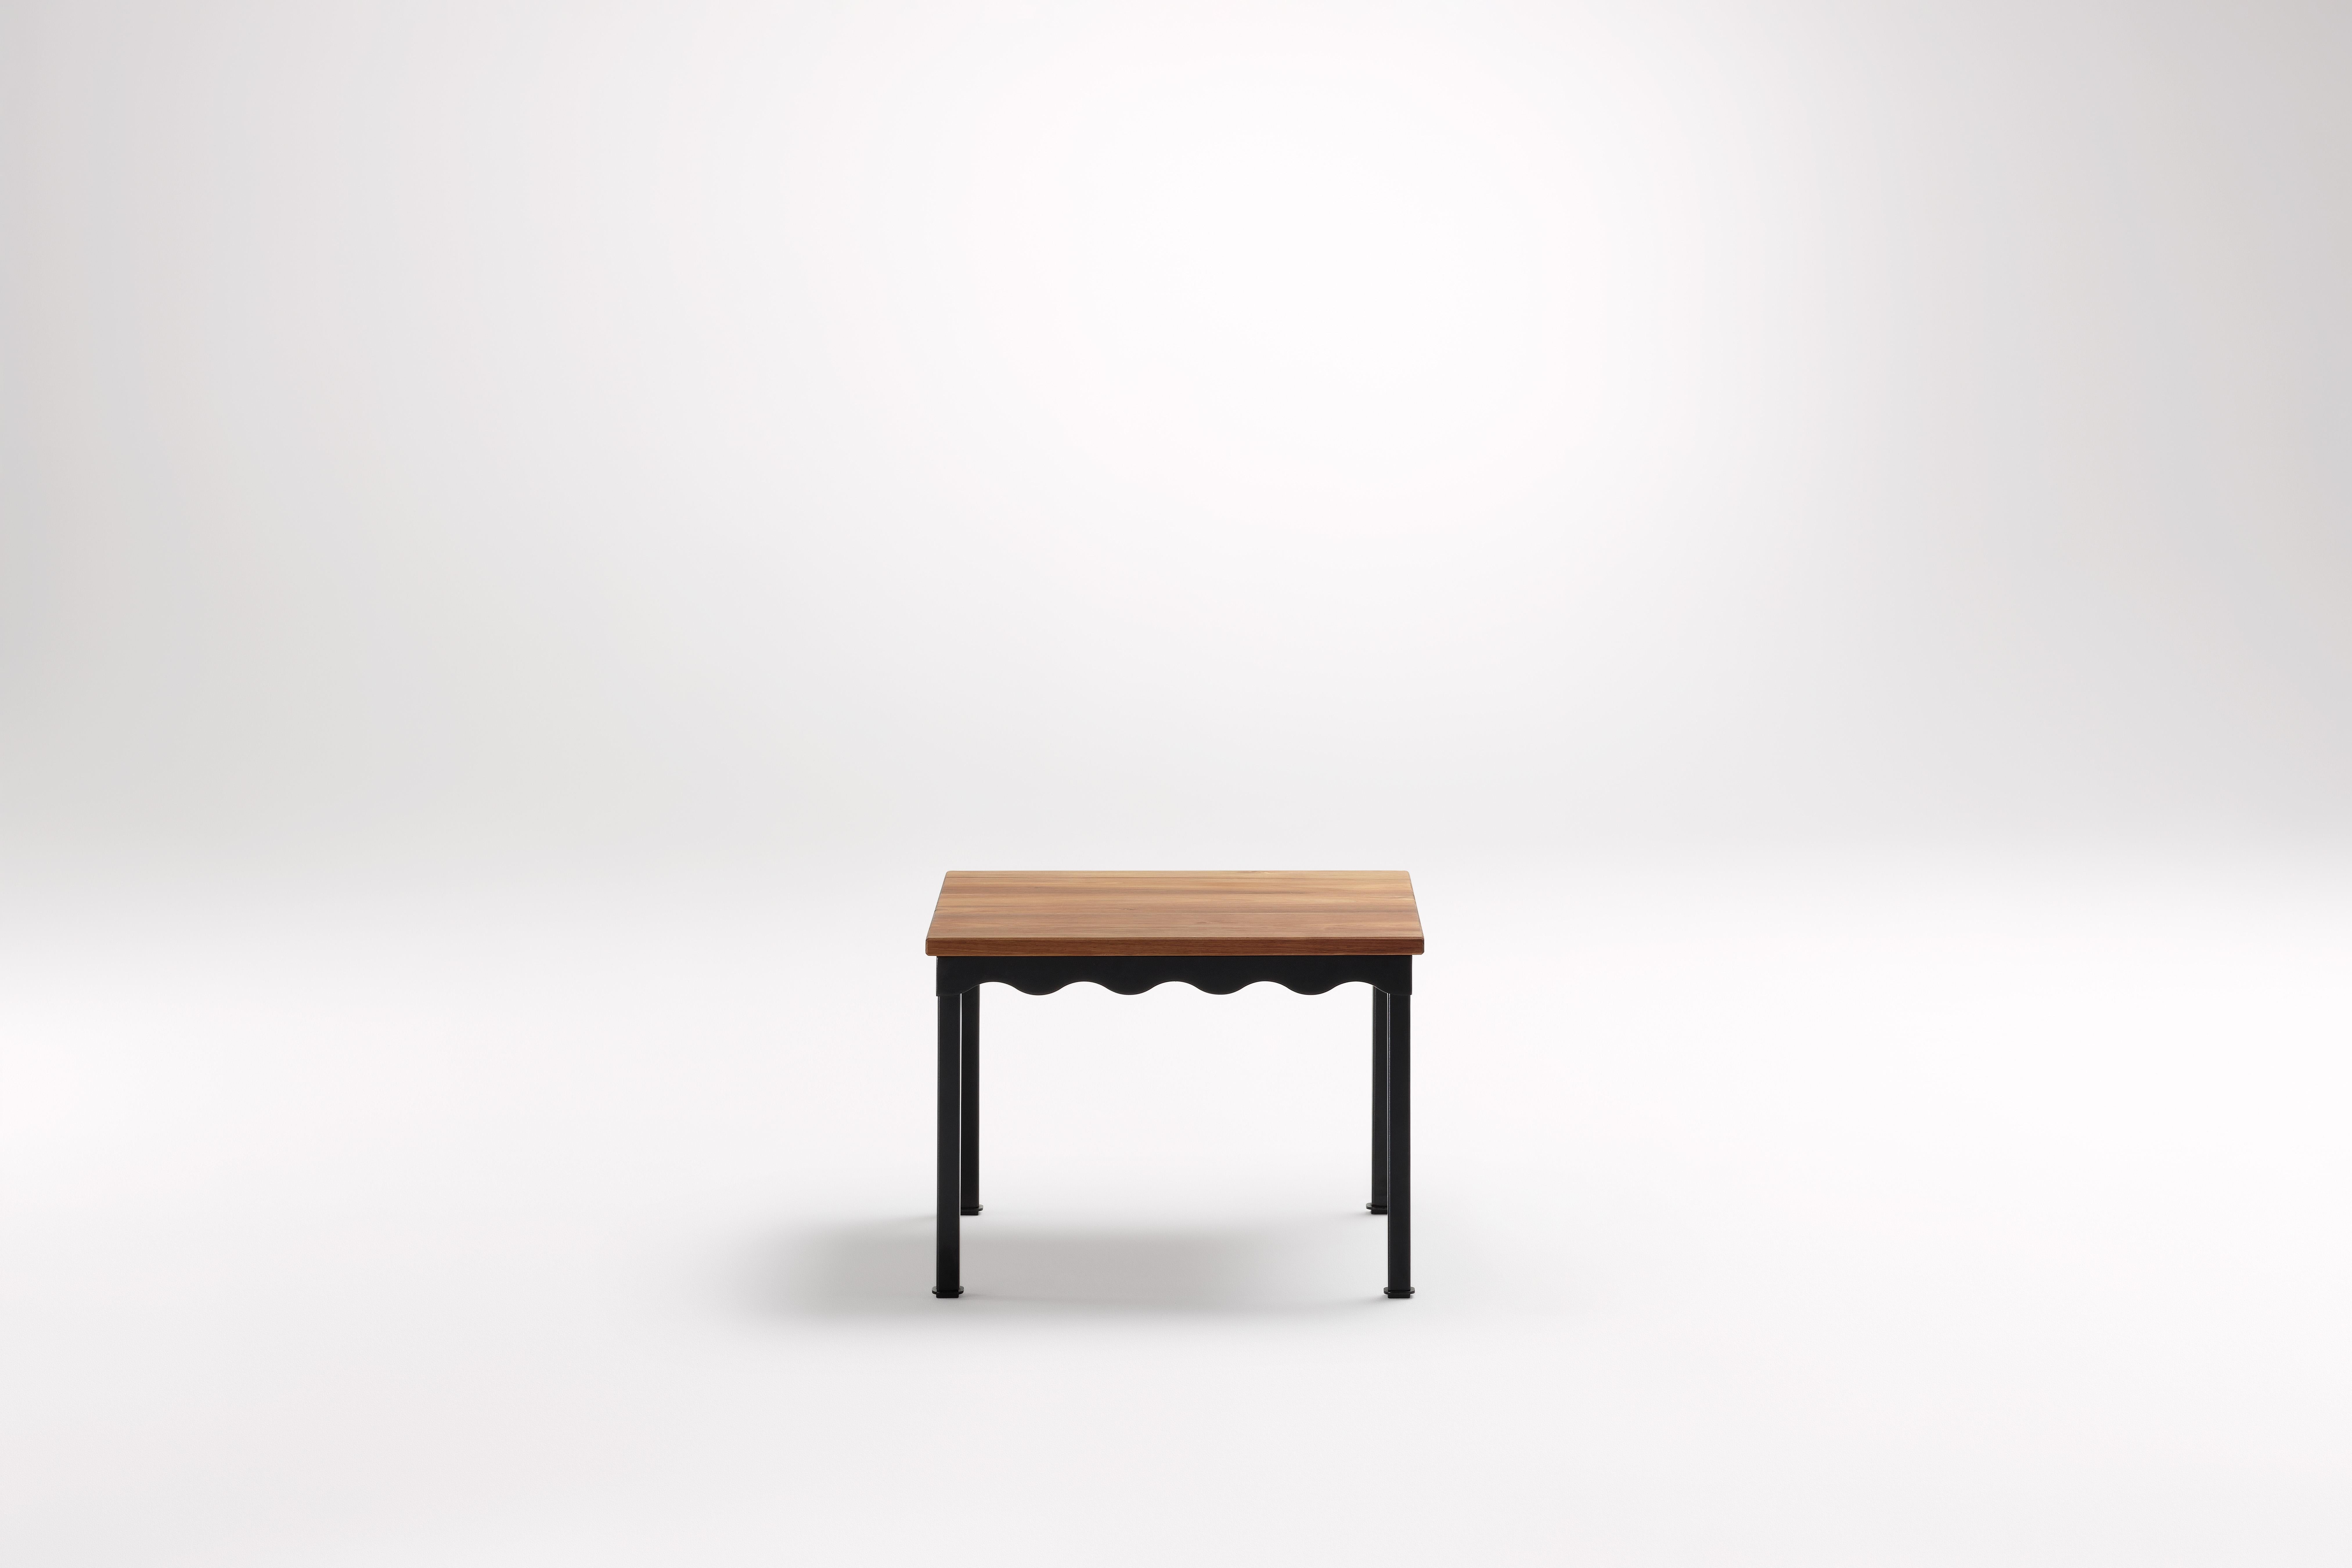 Blackwood Bellini Side Table by Coco Flip
Dimensions: D 54 x W 54 x H 39 cm
Materials: Timber / Stone tops, Powder-coated steel frame. 
Weight: 12 kg
Timber Tops :Blackwood
Frame Finishes: Textura Black.

Coco Flip is a Melbourne based furniture and